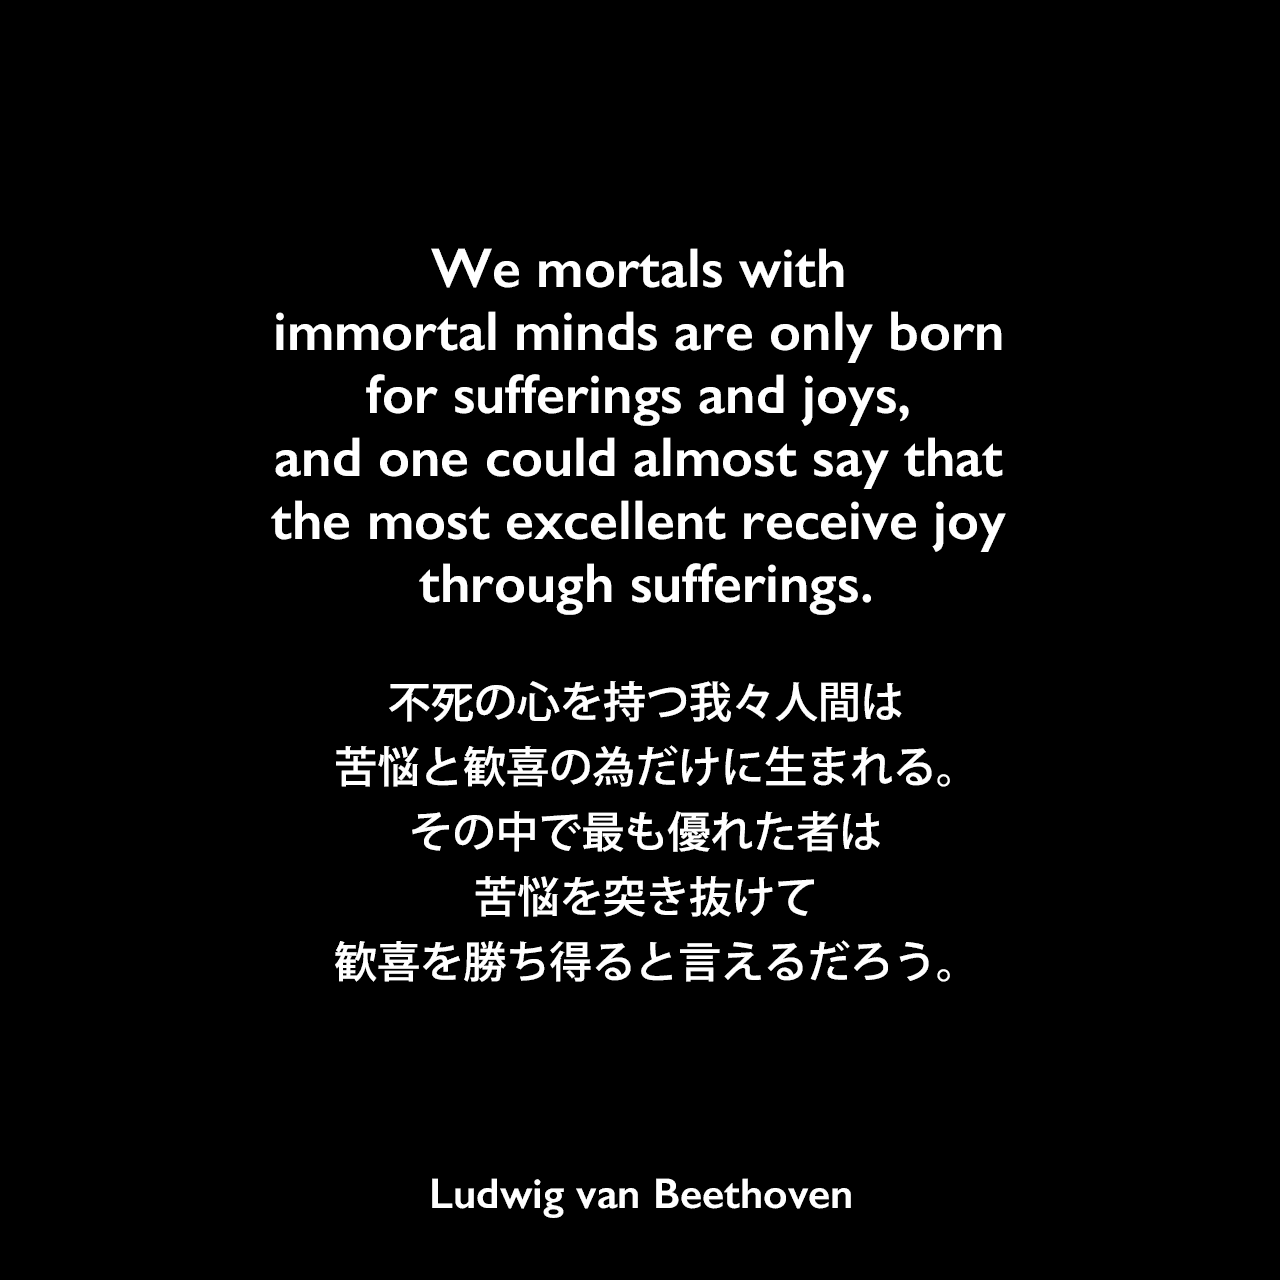 We mortals with immortal minds are only born for sufferings and joys, and one could almost say that the most excellent receive joy through sufferings.不死の心を持つ我々人間は、苦悩と歓喜の為だけに生まれる。その中で最も優れた者は、苦悩を突き抜けて、歓喜を勝ち得ると言えるだろう。Ludwig van Beethoven